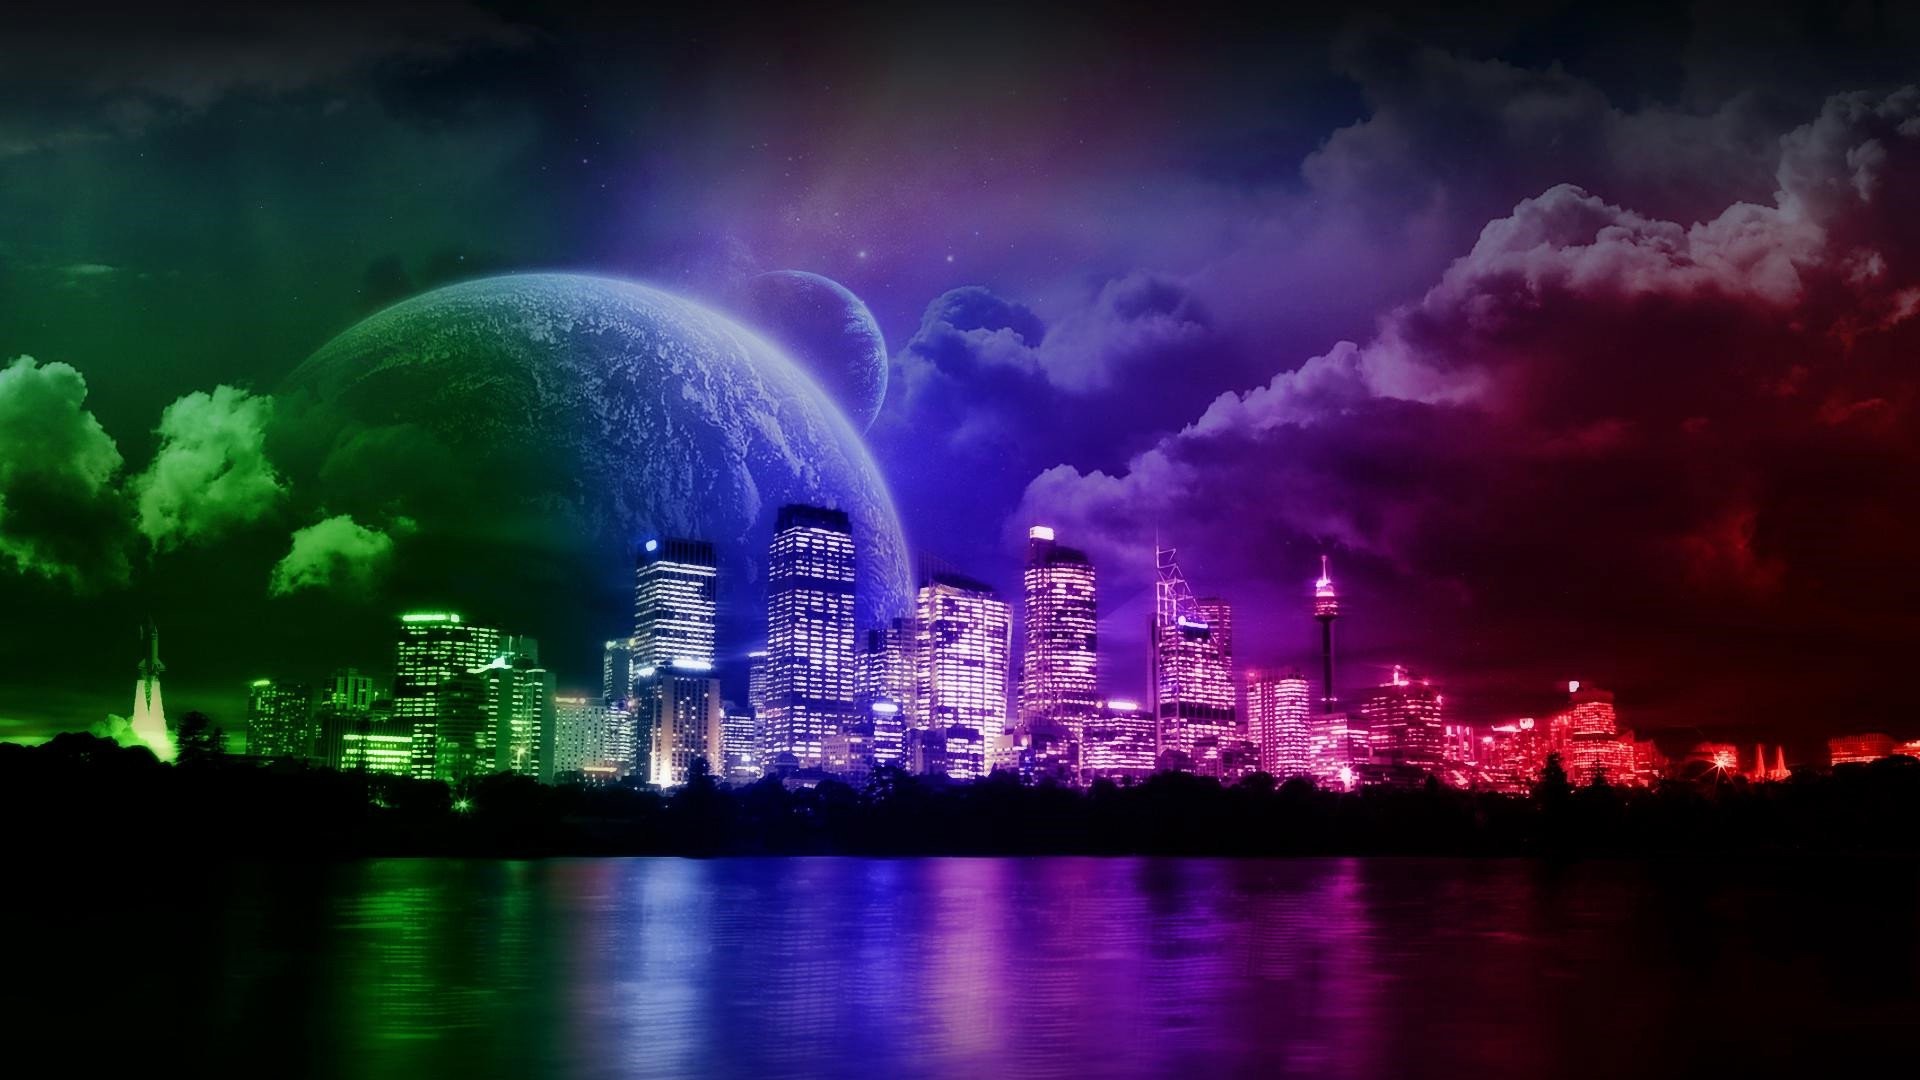 1920x1080 Neon City 817602. UPLOAD. TAGS: Cool Backgrounds Background Fantasy Abstract